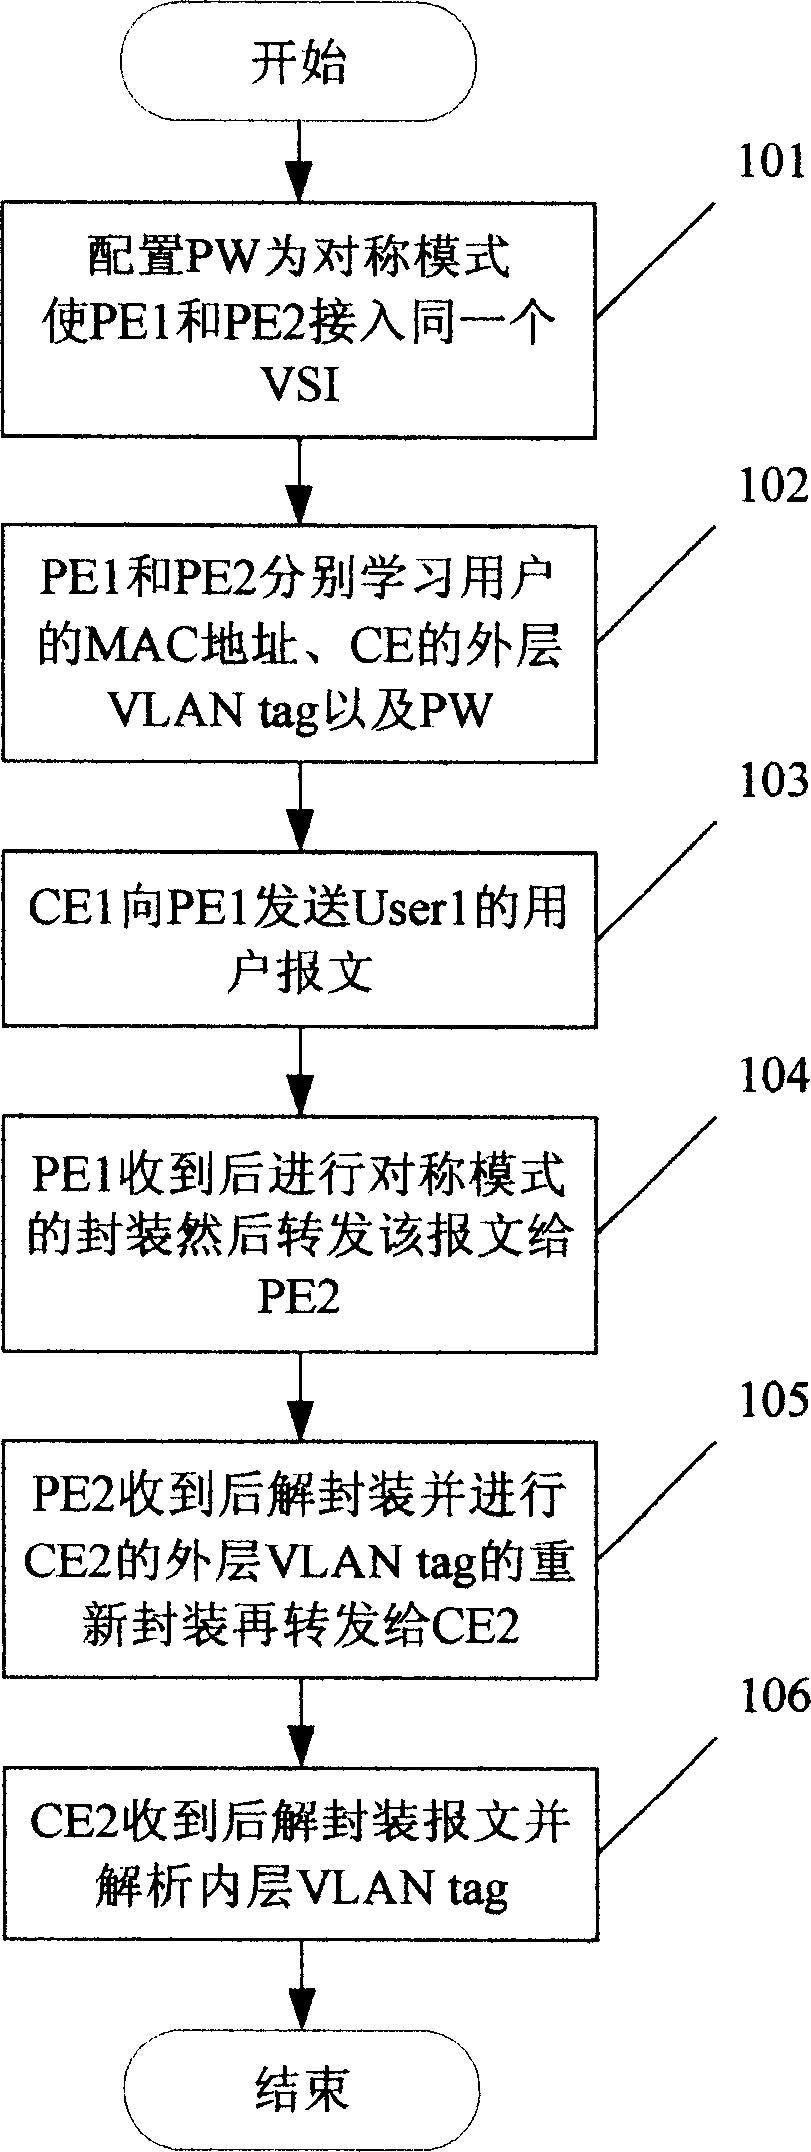 Method and system of user access virtual special LAN service